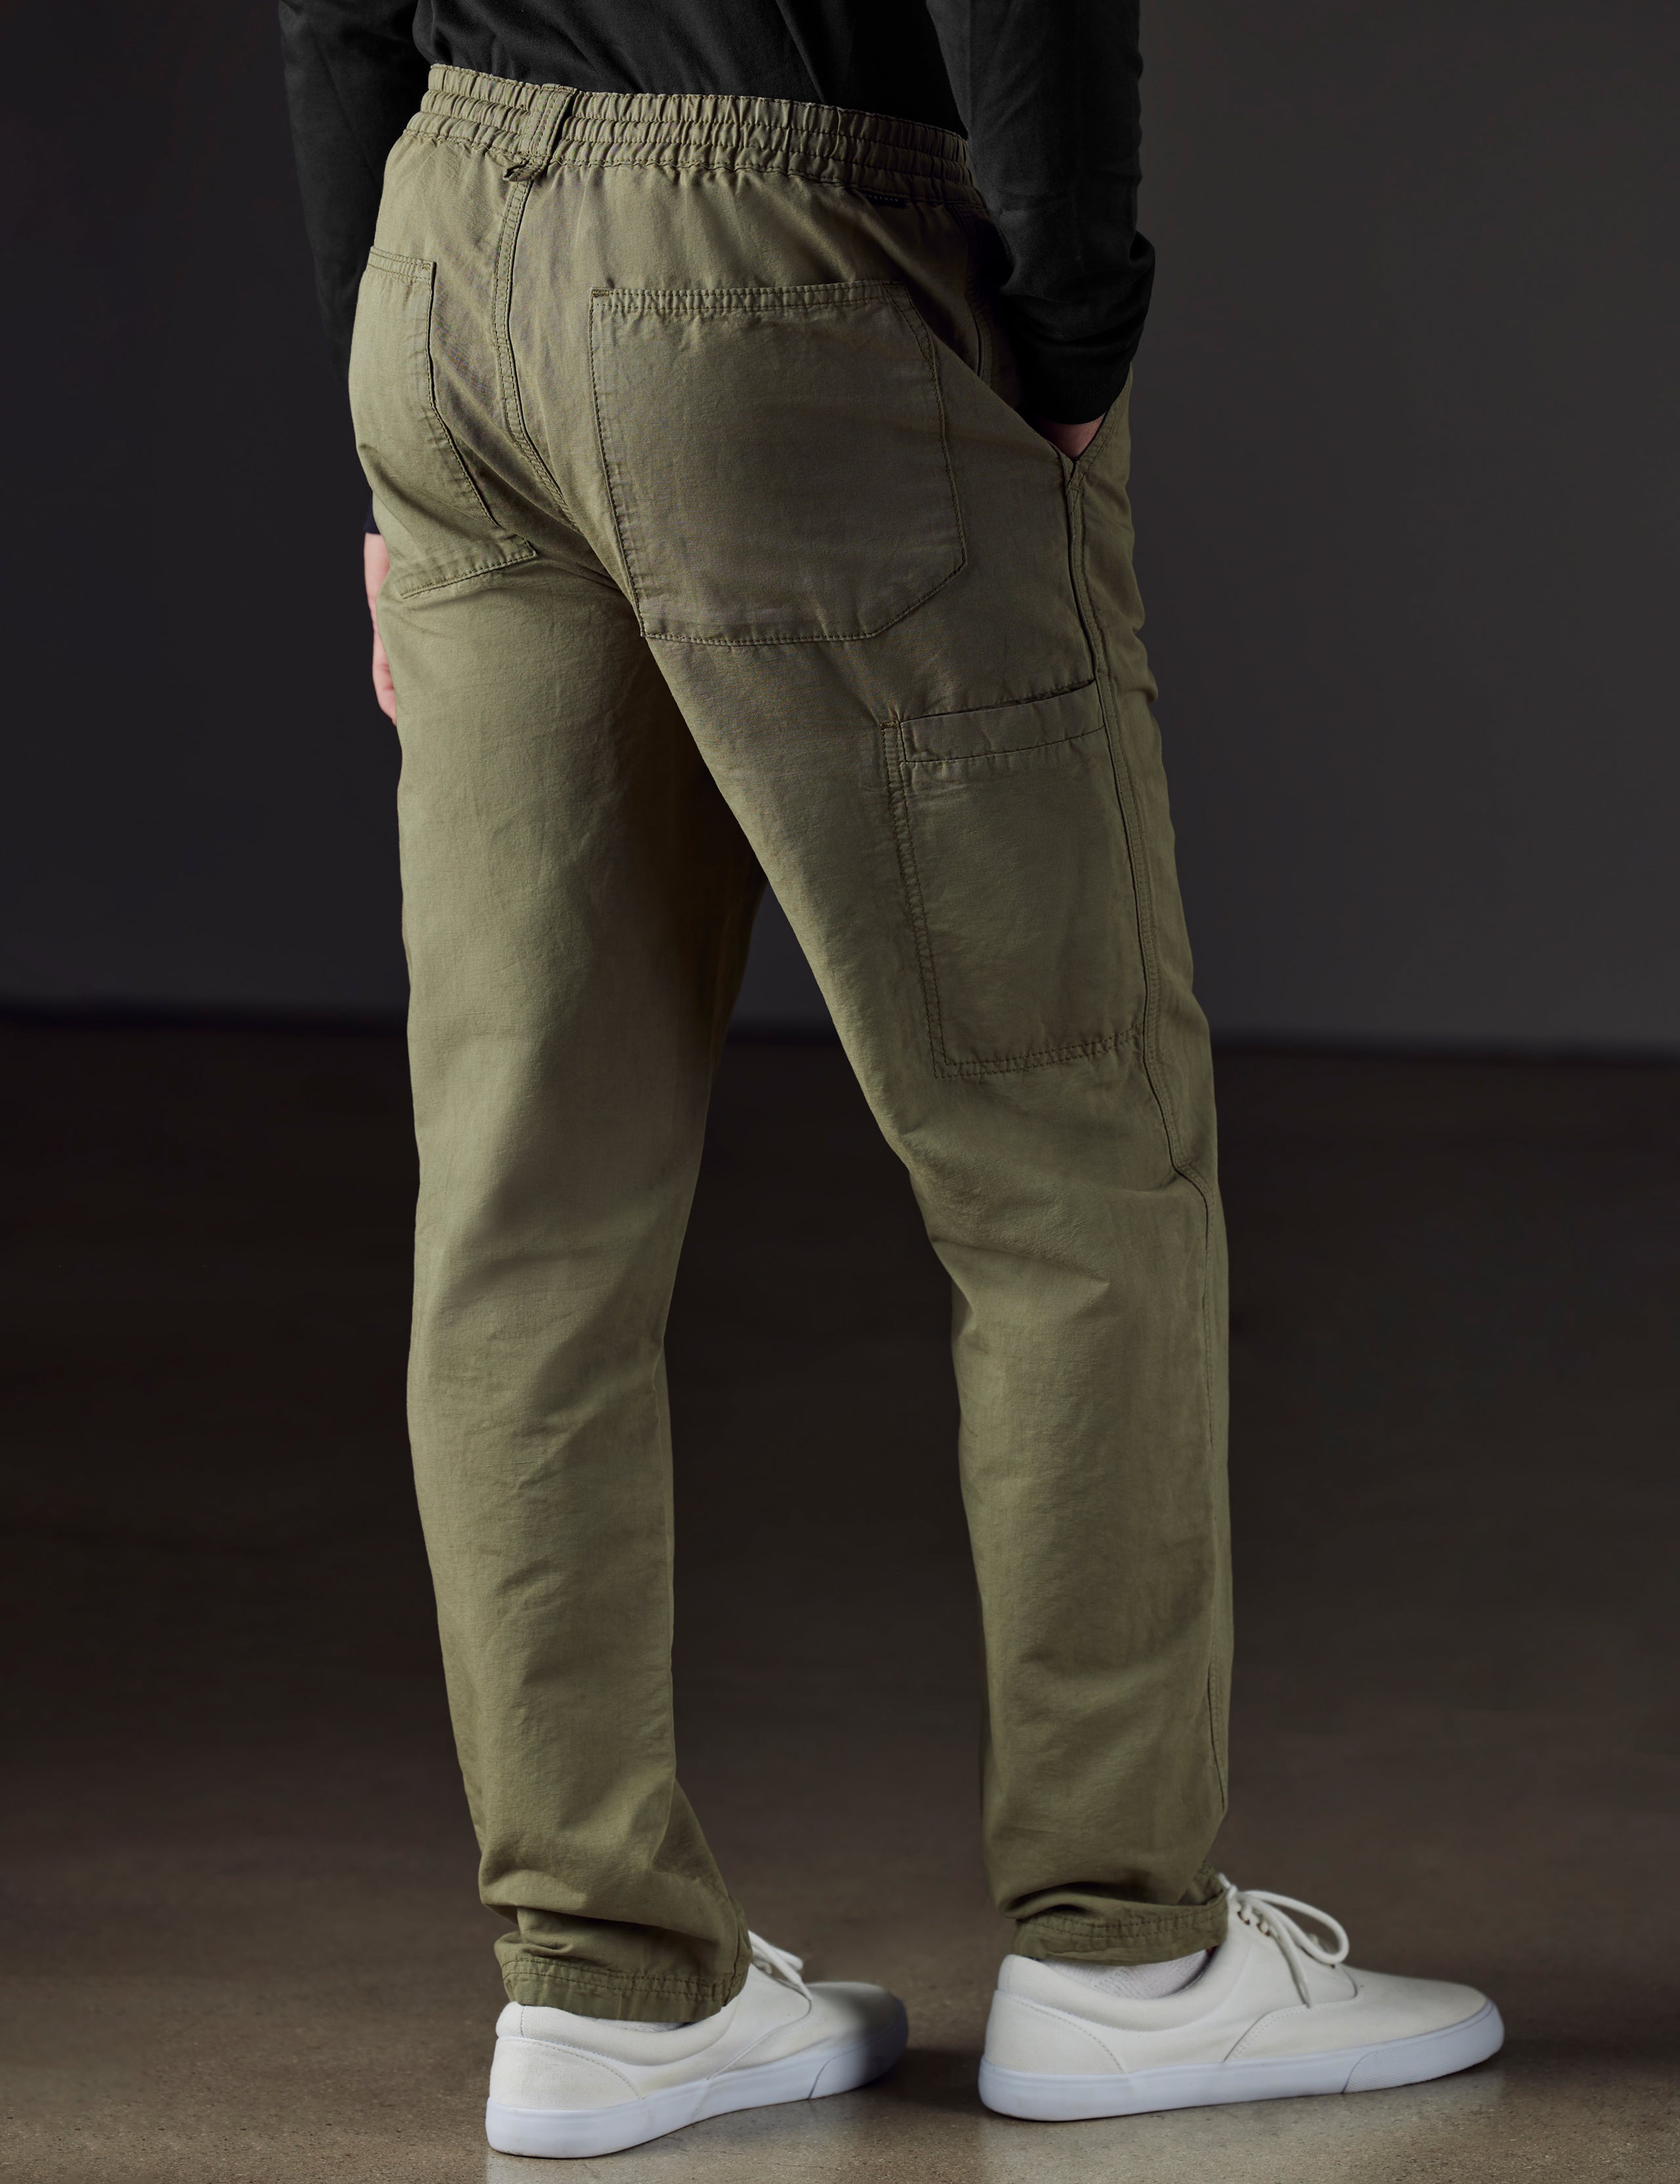 green fatigue pant from AETHER Apparel